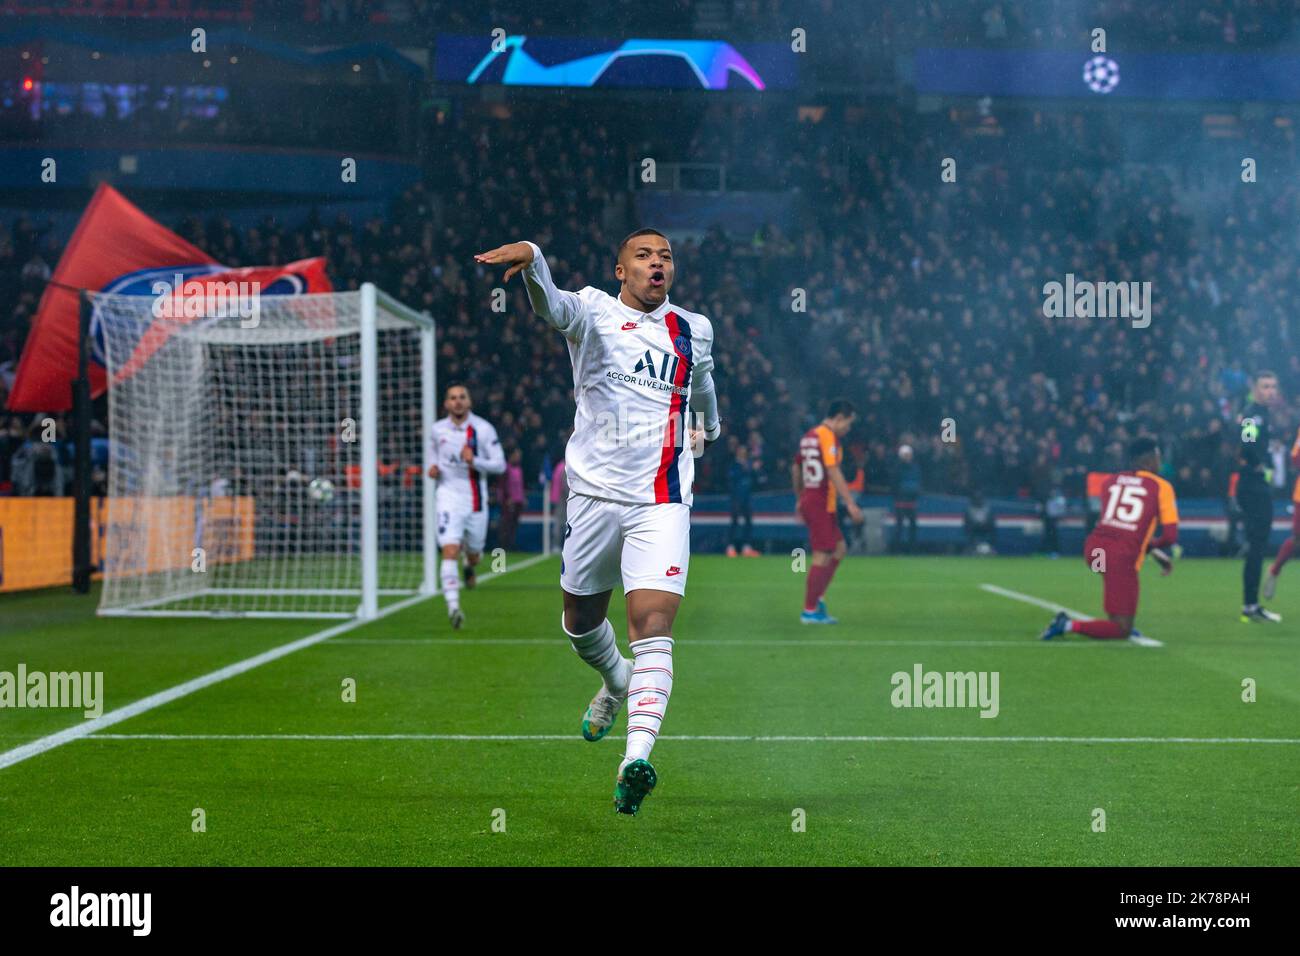 Paris Saint Germain's Kylian Mbappe celebrates scoring his side's fourth goal of the game with his team mates Stock Photo